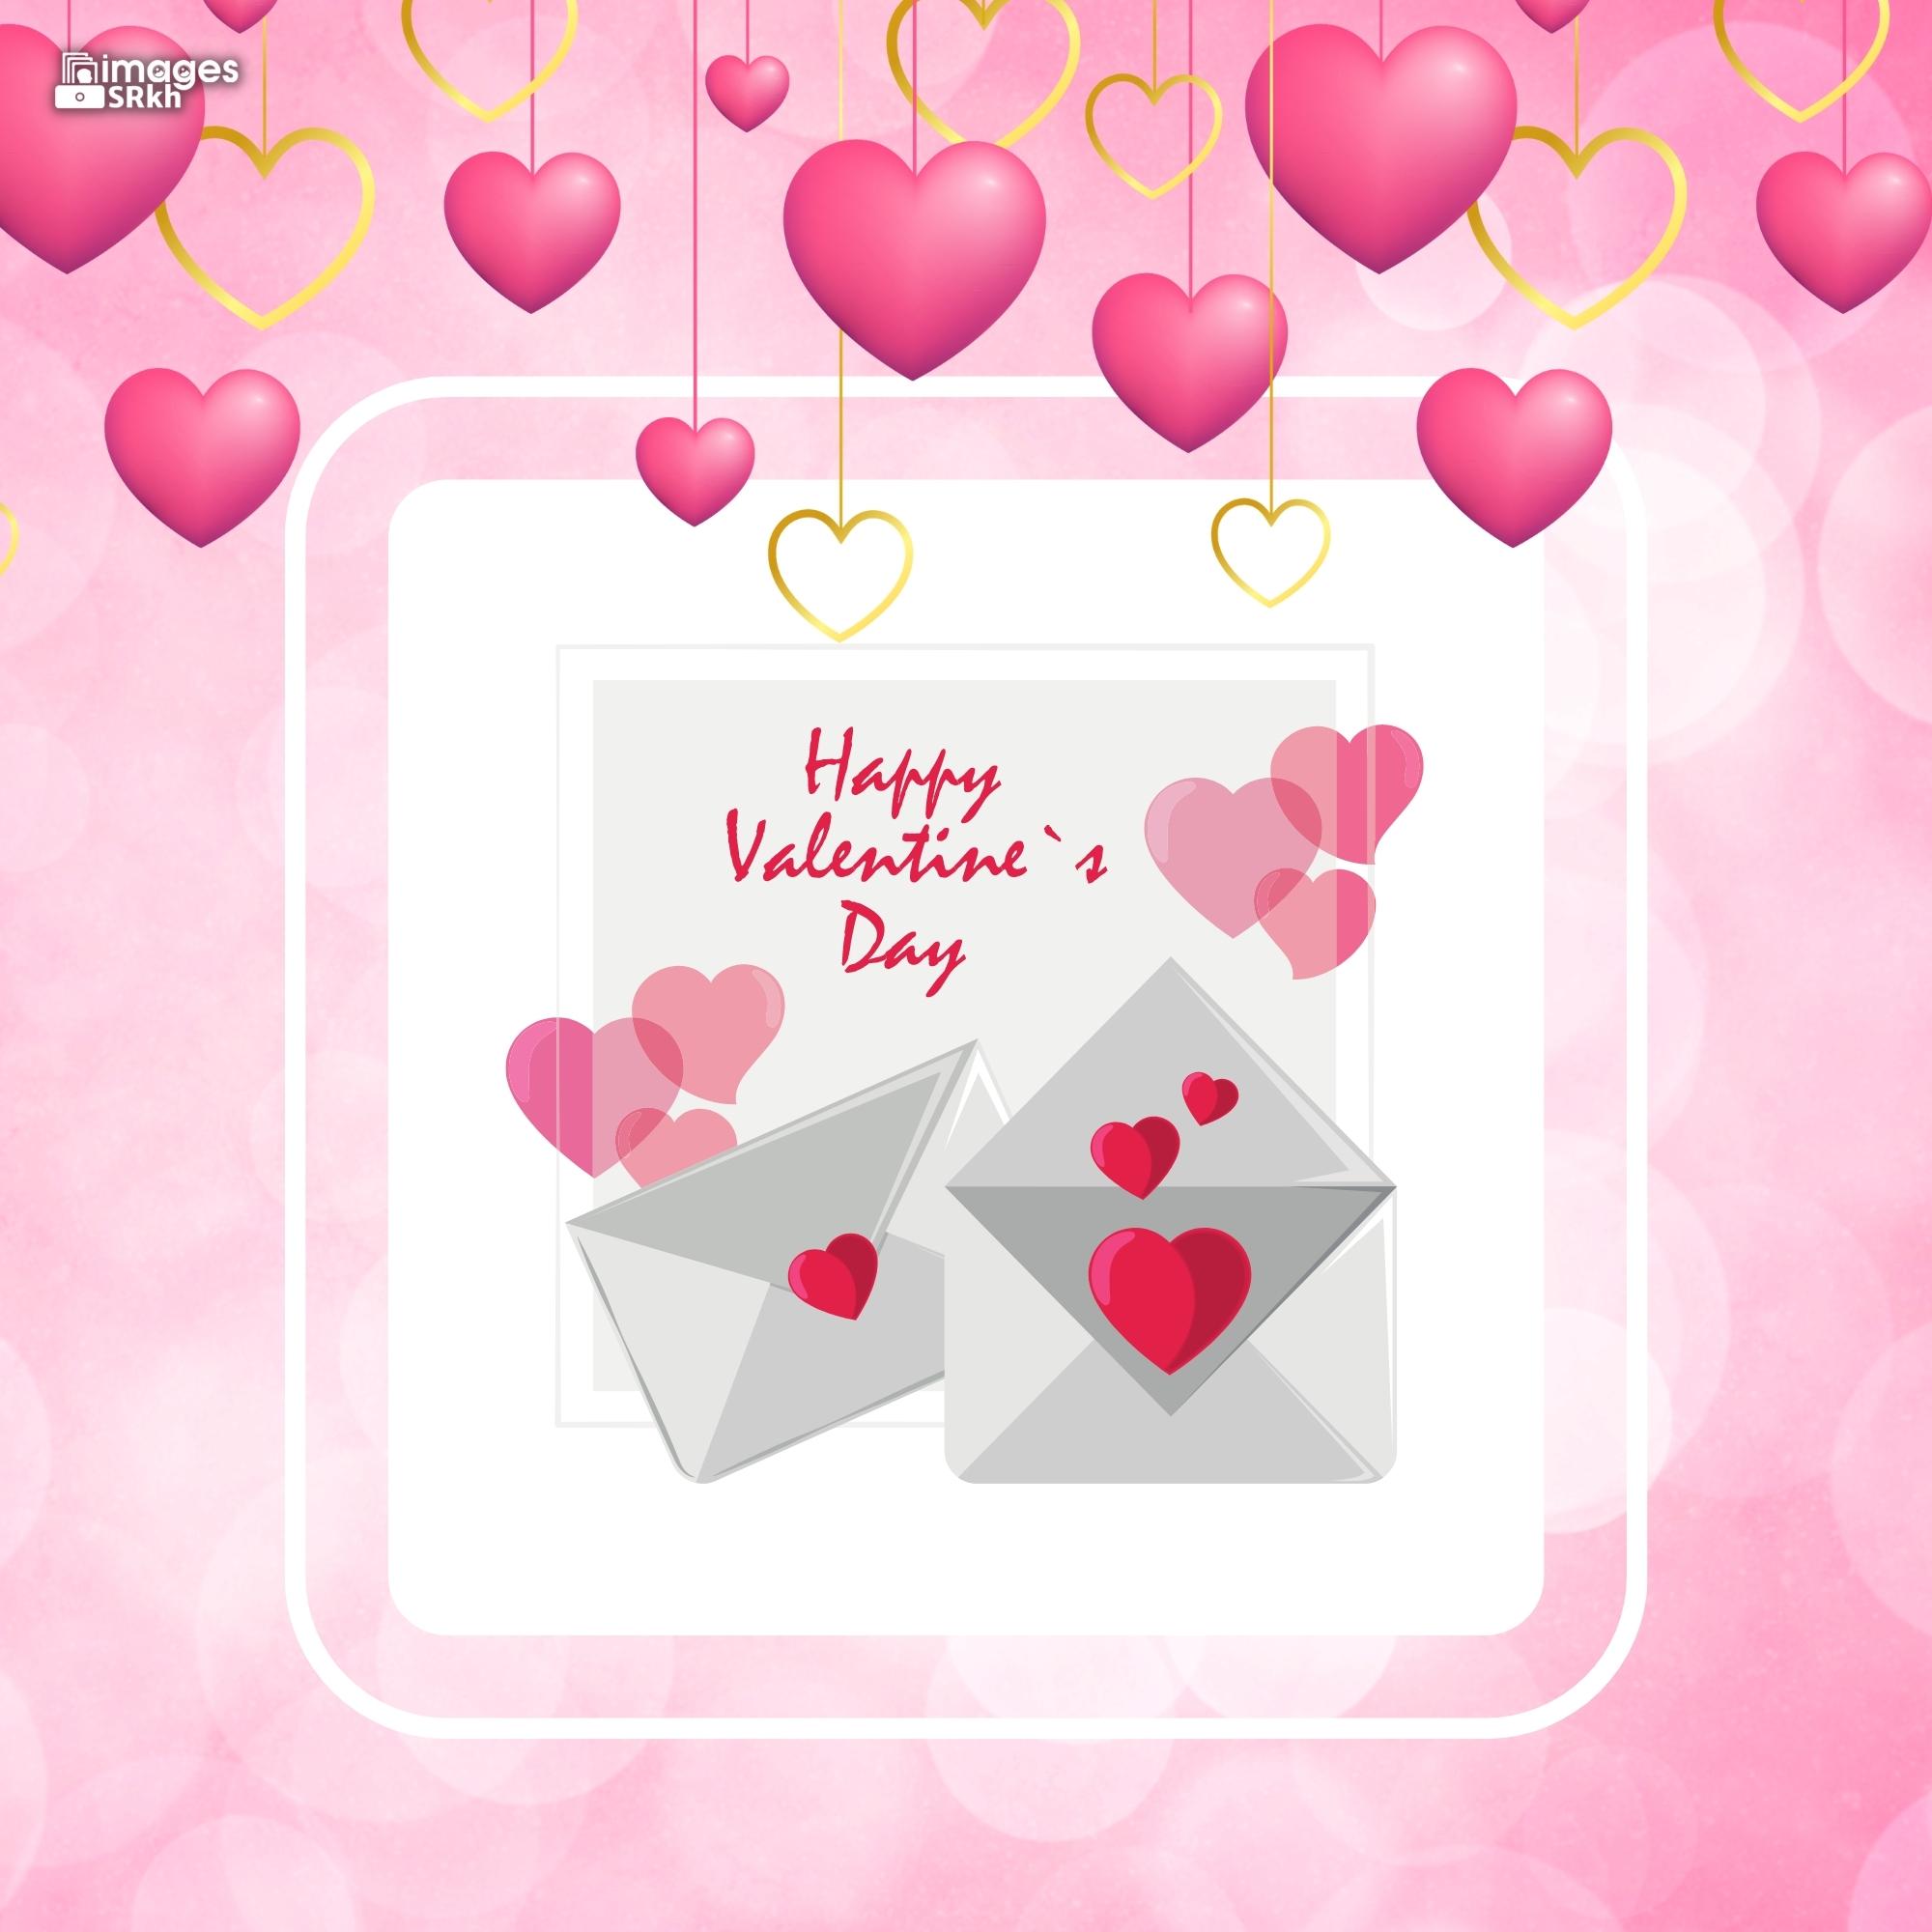 Happy Valentines Day | 539 | PREMIUM IMAGES | Wishes for Love